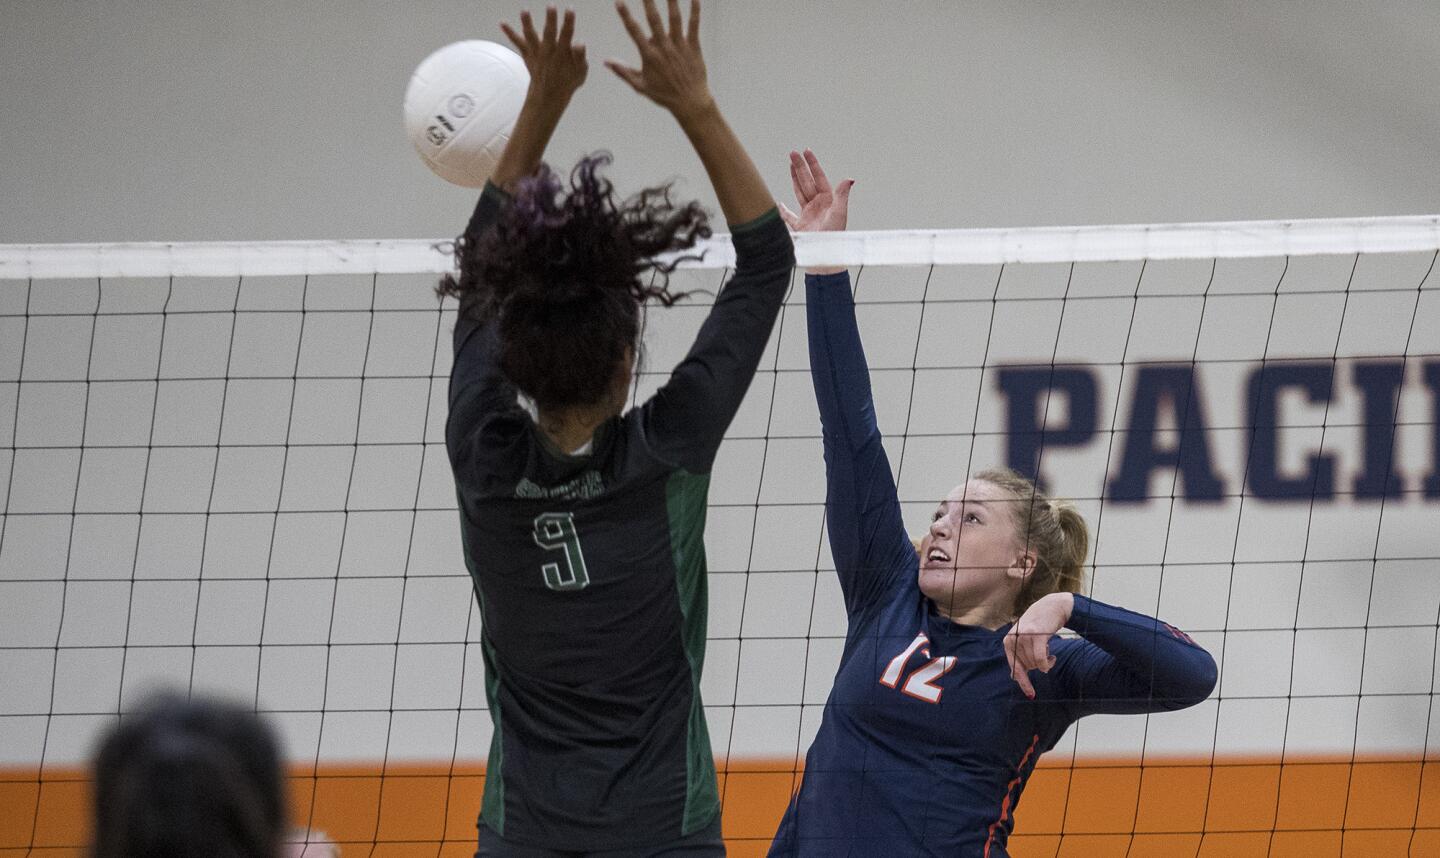 Photo Gallery: Pacifica Christian vs. Orangewood Academy in a girls' volleyball game